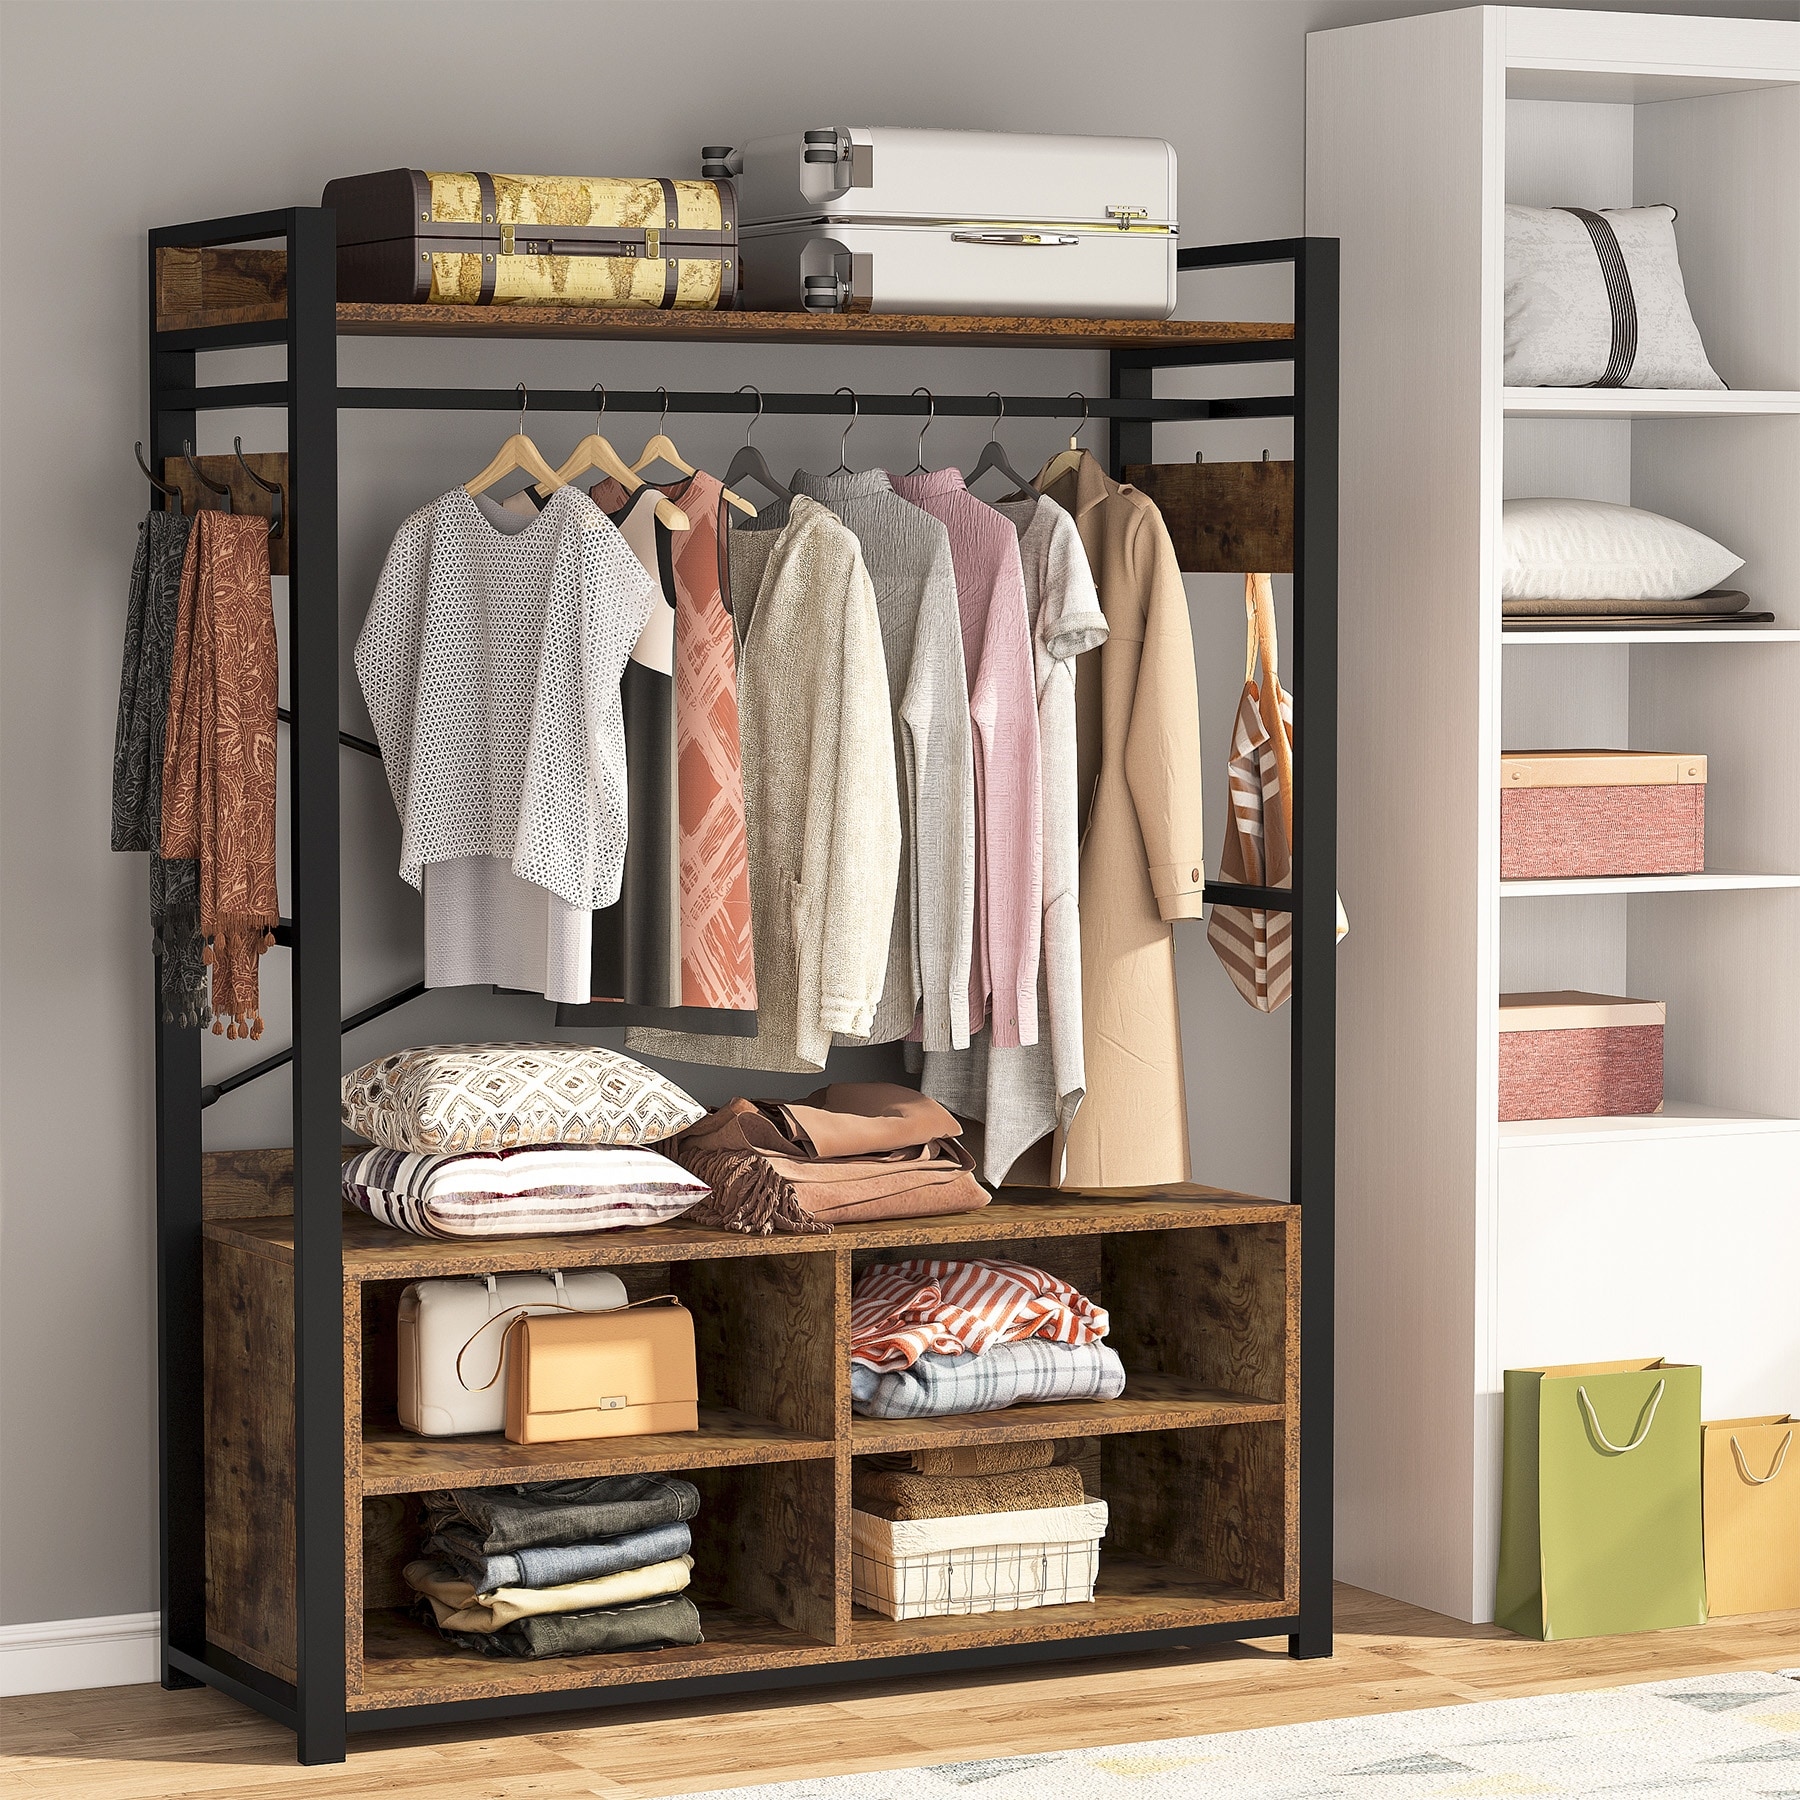 https://ak1.ostkcdn.com/images/products/is/images/direct/3a21eacf6b2ffd8c6bac9c11e285a453c06735f7/Metal-Wood-Free-standing-Closet-Clothing-Rack-Closet-Organizer-System-with-Shelves-Clothes-Garment-Rack-Shelving-for-Bedroom.jpg